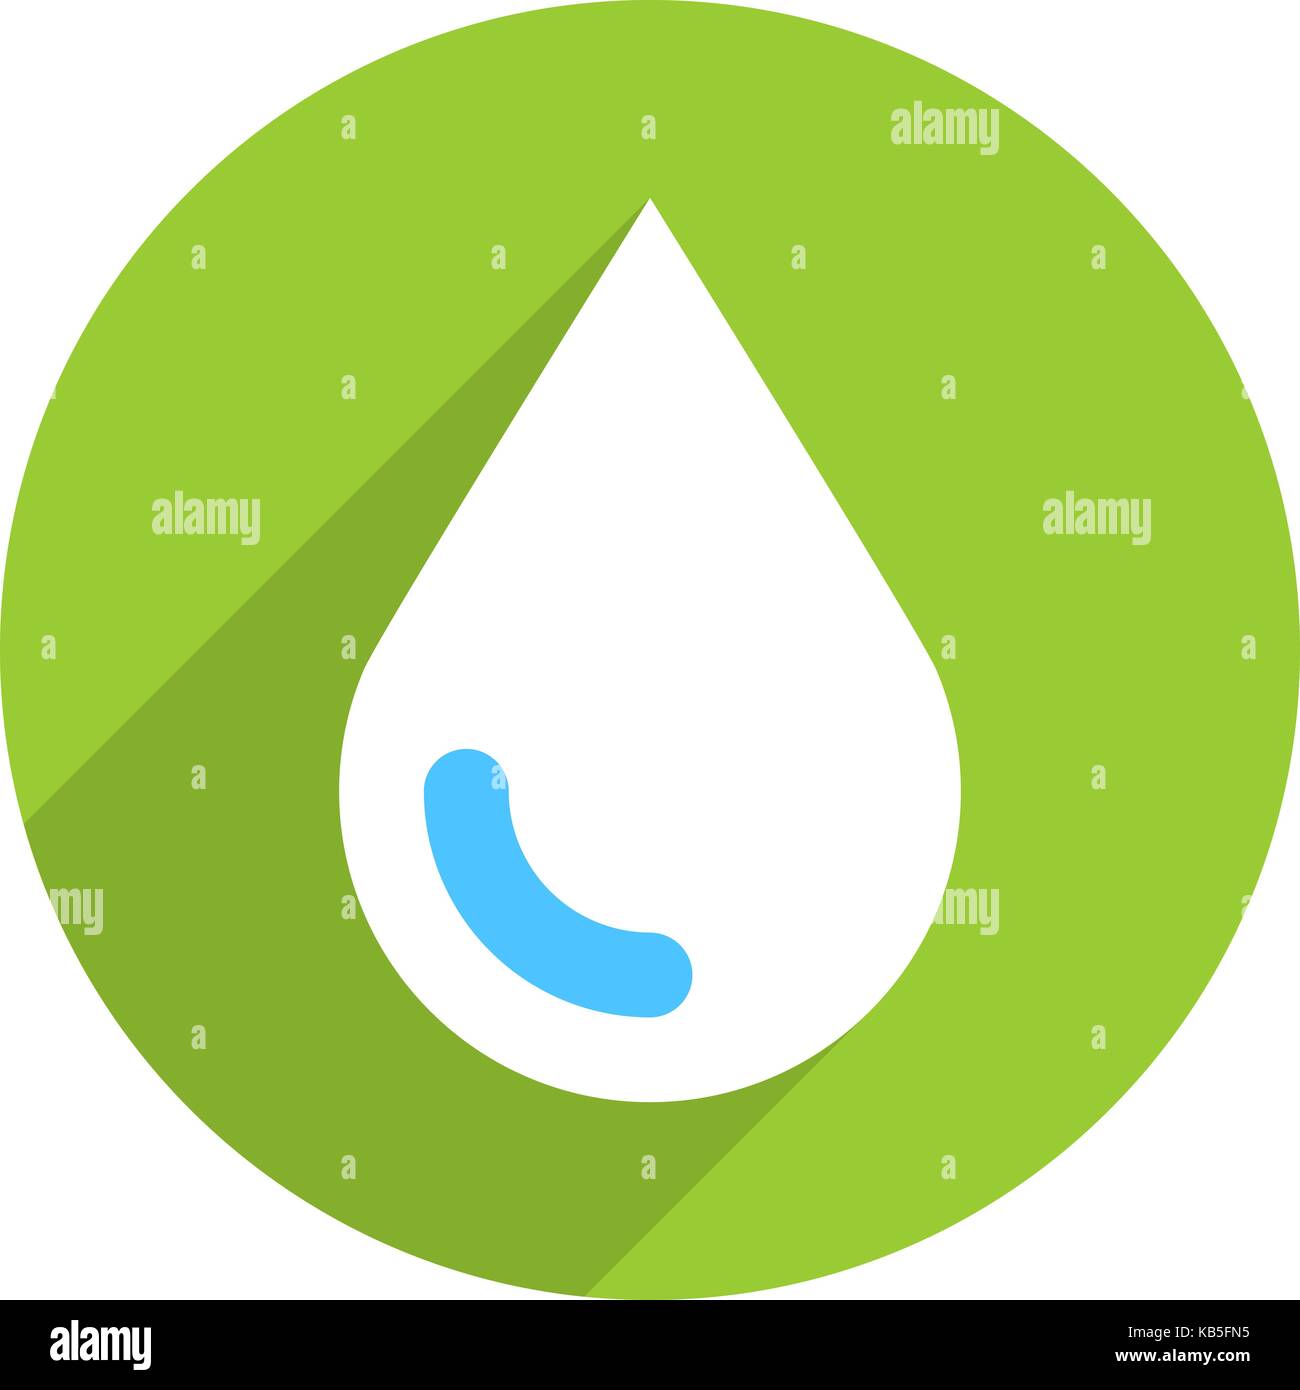 Use it in all your designs. White water drop icon ecology sign on circlular shape. Flat long shadow style. Vector illustration a graphic element Stock Vector